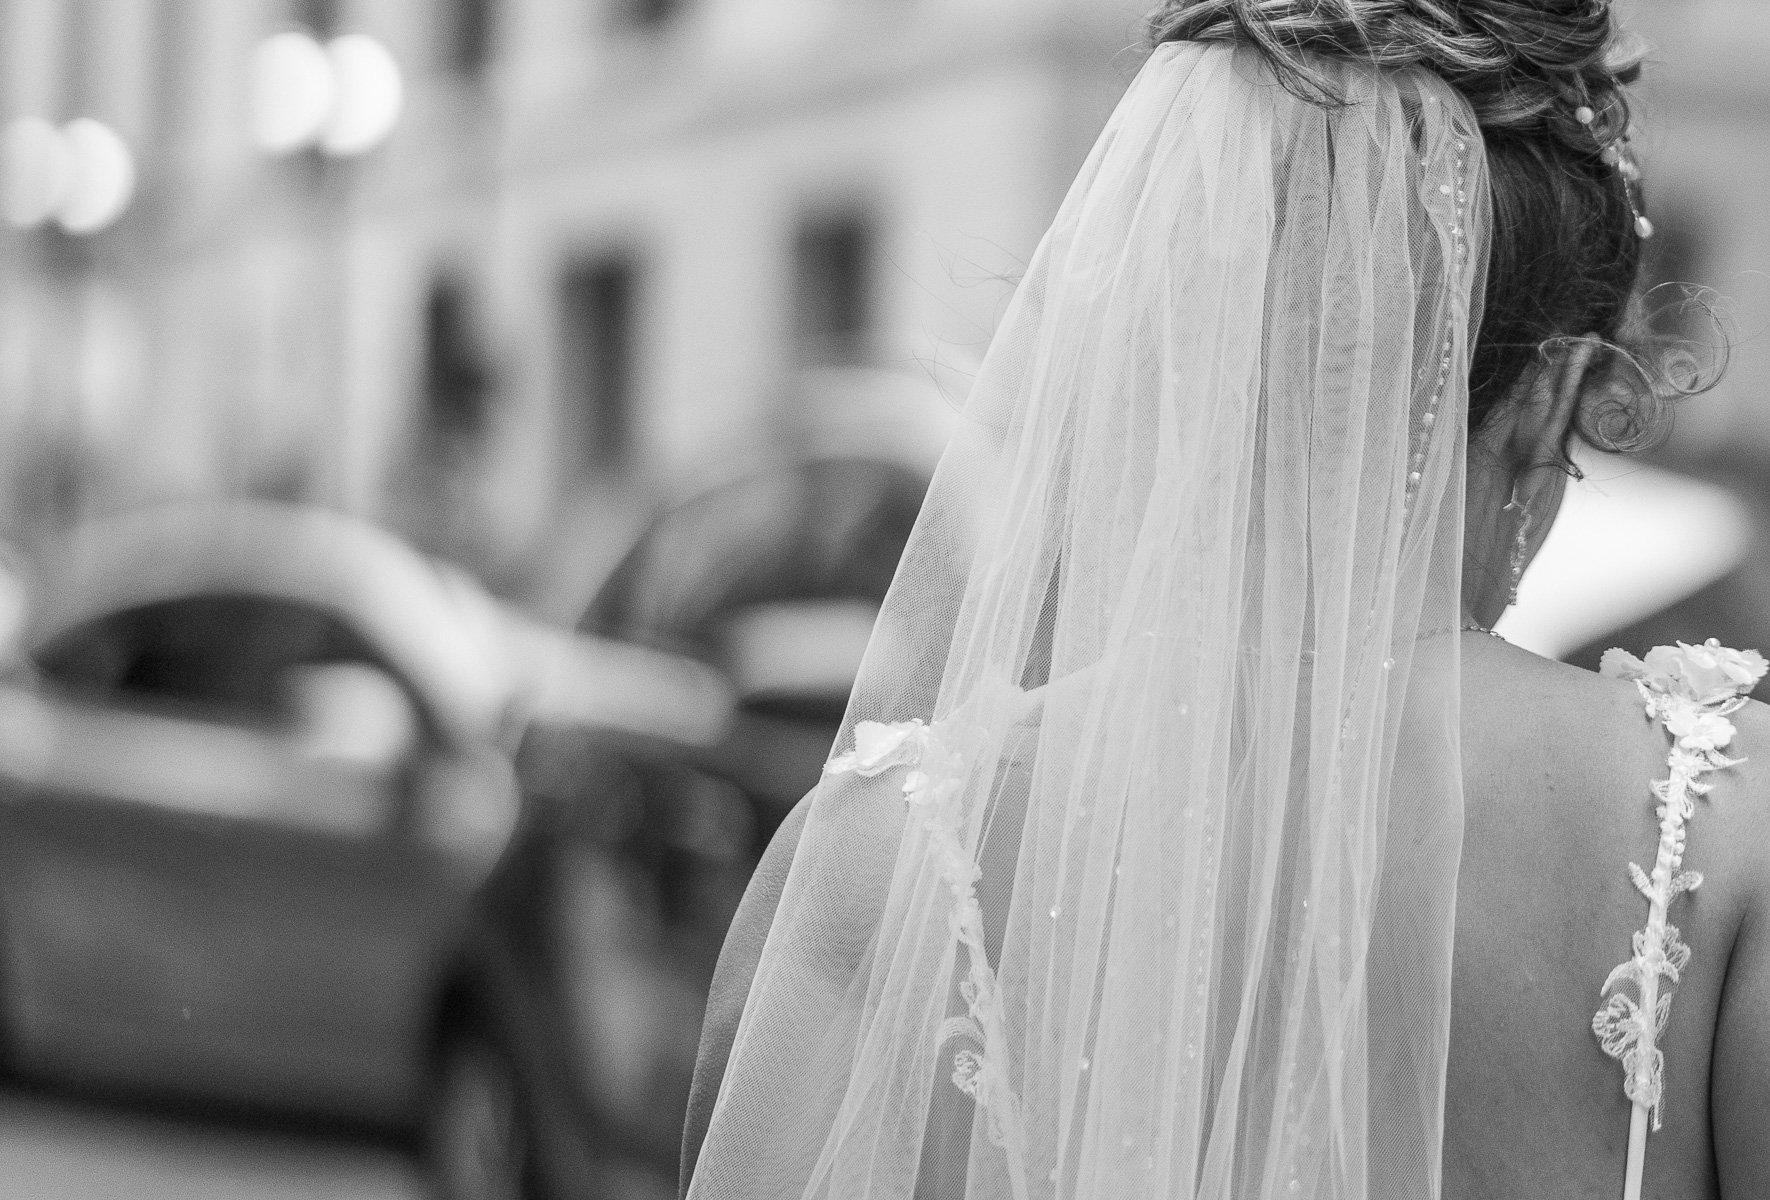    Elegant photograph of a bride's veil, highlighting the fine lace details and the soft, flowing fabric in a serene setting   